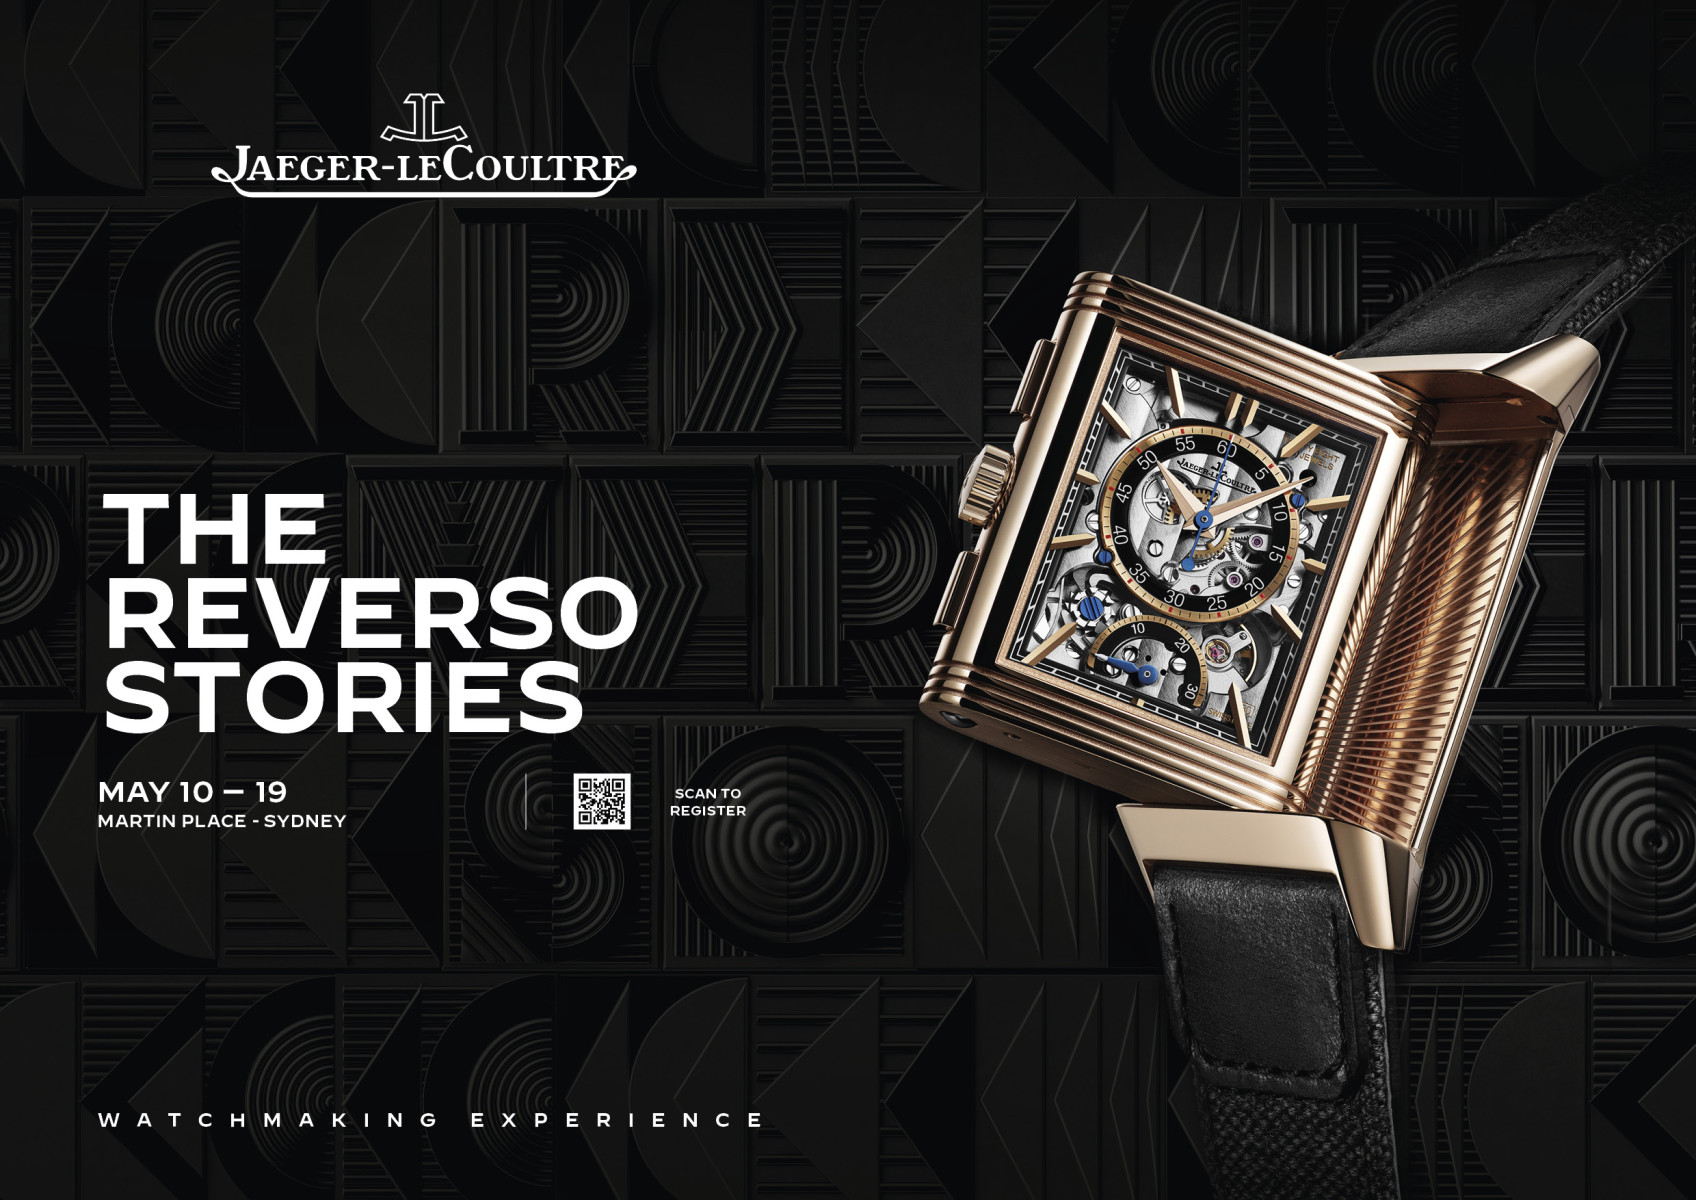 Reverso Experience exhibition travels to Sydney